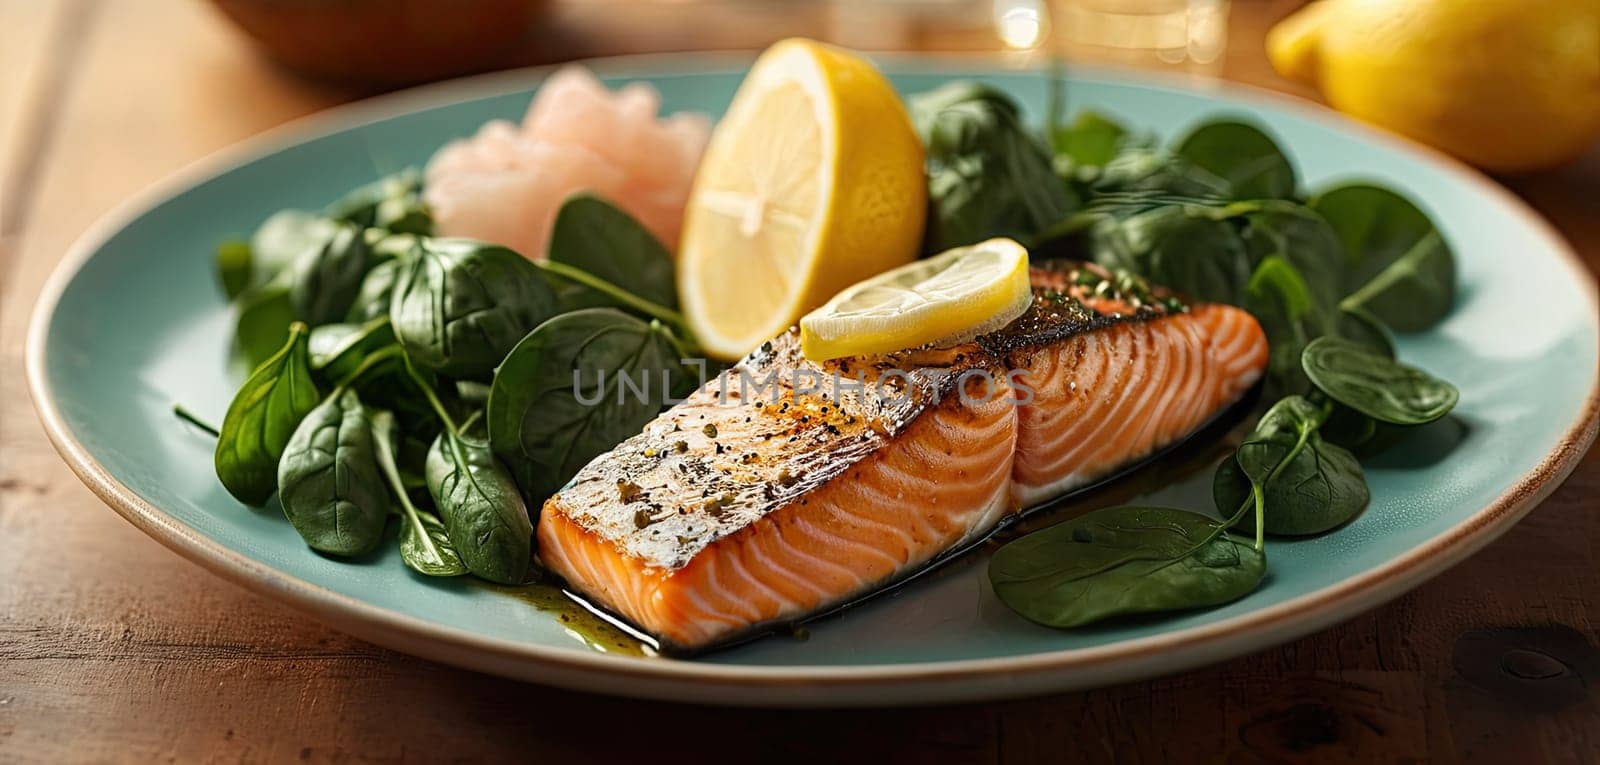 Salmon steak, spinach, lemon. Grilled salmon steak with grill marks, served with fresh spinach and lemon slices, steam rising. by panophotograph